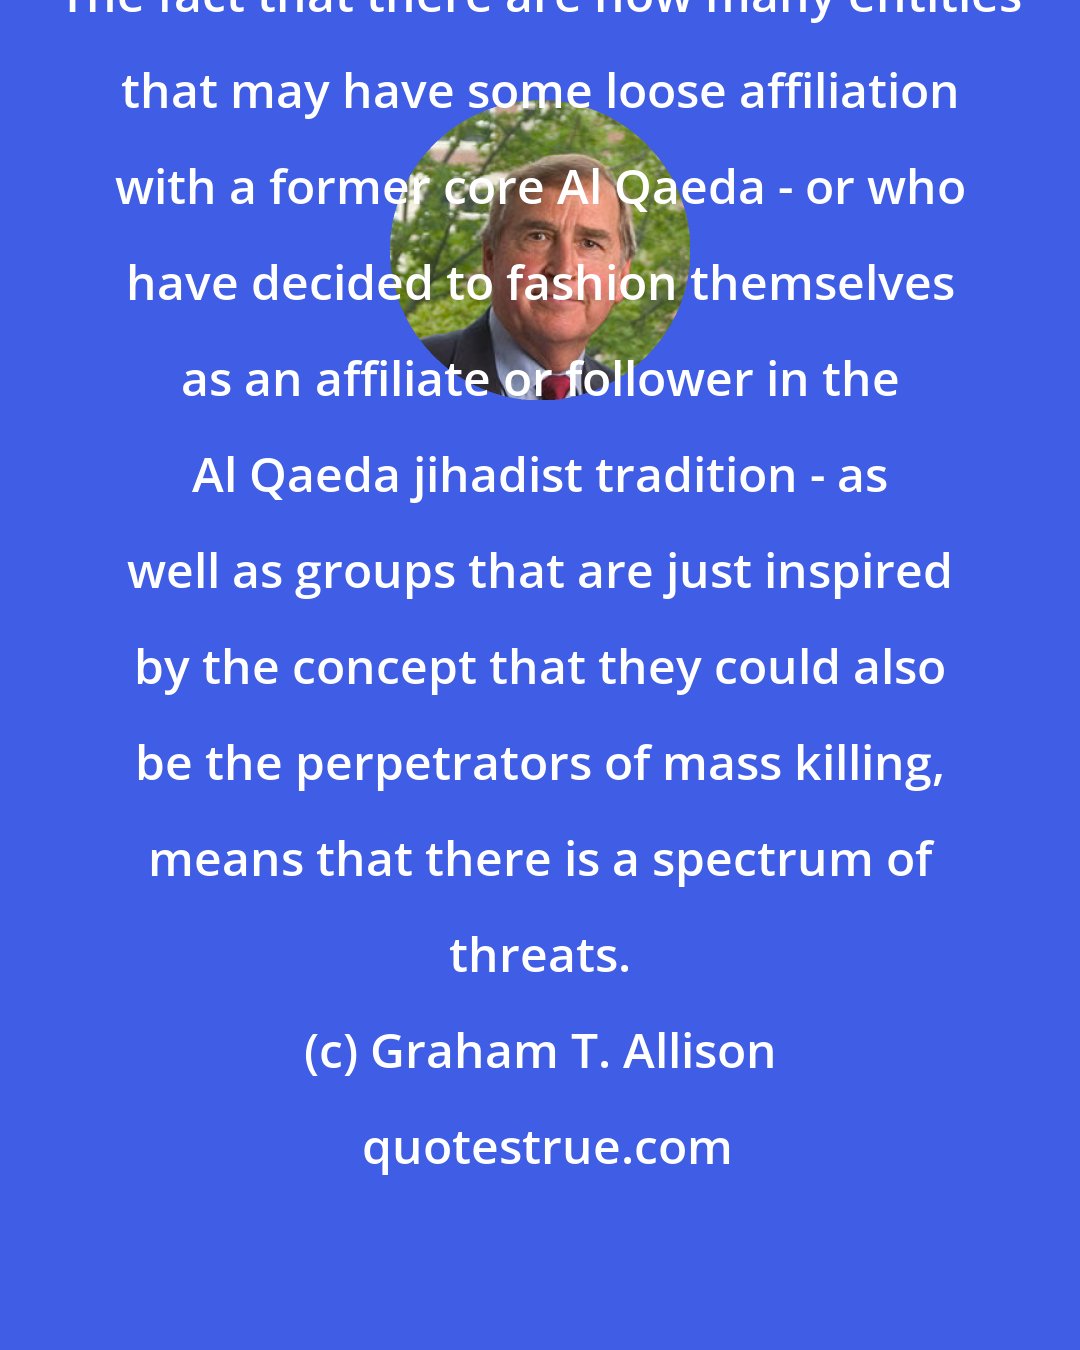 Graham T. Allison: The fact that there are now many entities that may have some loose affiliation with a former core Al Qaeda - or who have decided to fashion themselves as an affiliate or follower in the Al Qaeda jihadist tradition - as well as groups that are just inspired by the concept that they could also be the perpetrators of mass killing, means that there is a spectrum of threats.